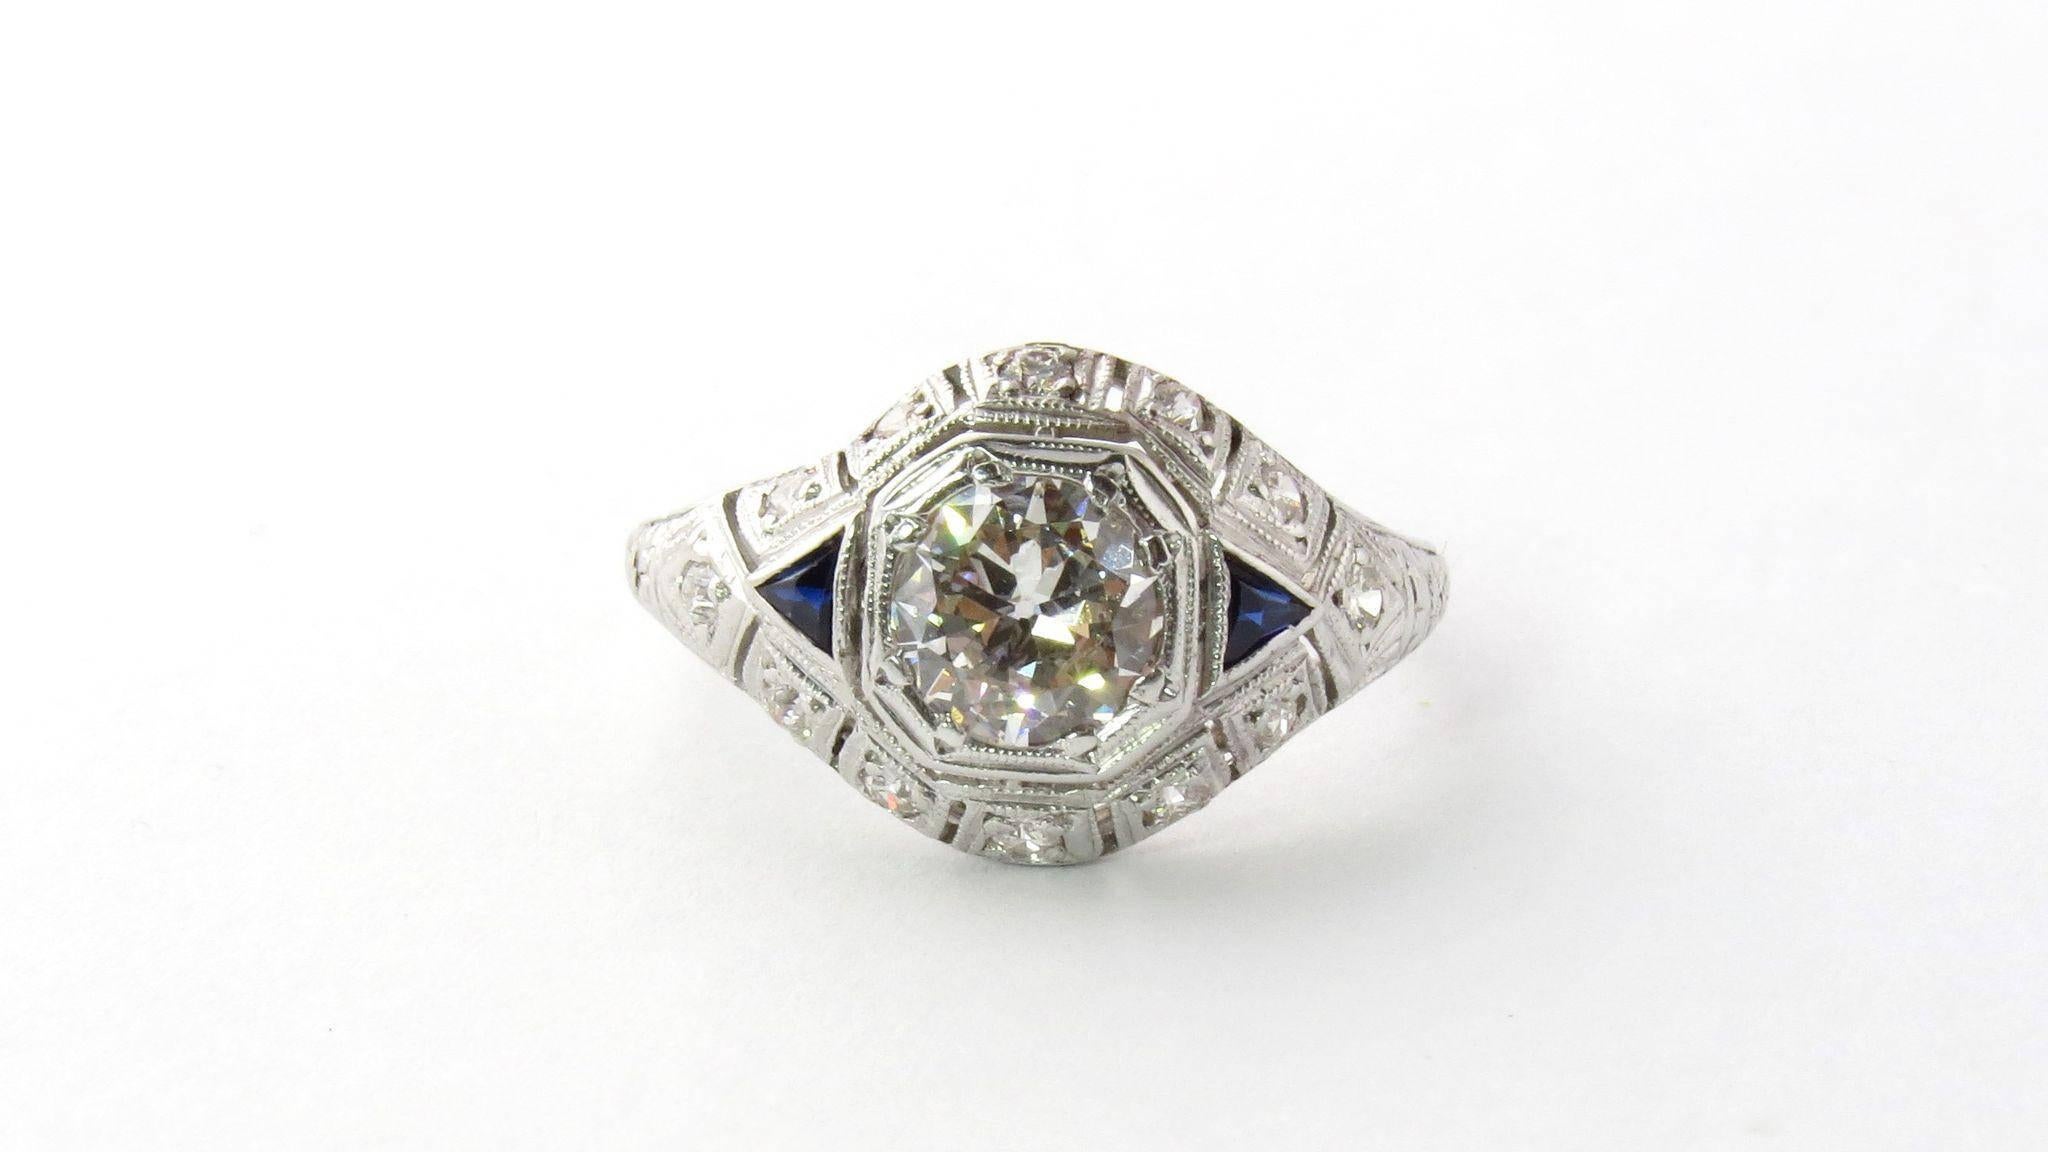 Antique Edwardian Platinum Diamond and Sapphire Dome Ring. 

Set with an approx. 1.00ct. European cut diamond in an octagonal illusion setting. Center diamond is flanked by two triangle cut sapphires and surrounded by smaller diamonds. 

Size 8 3/4